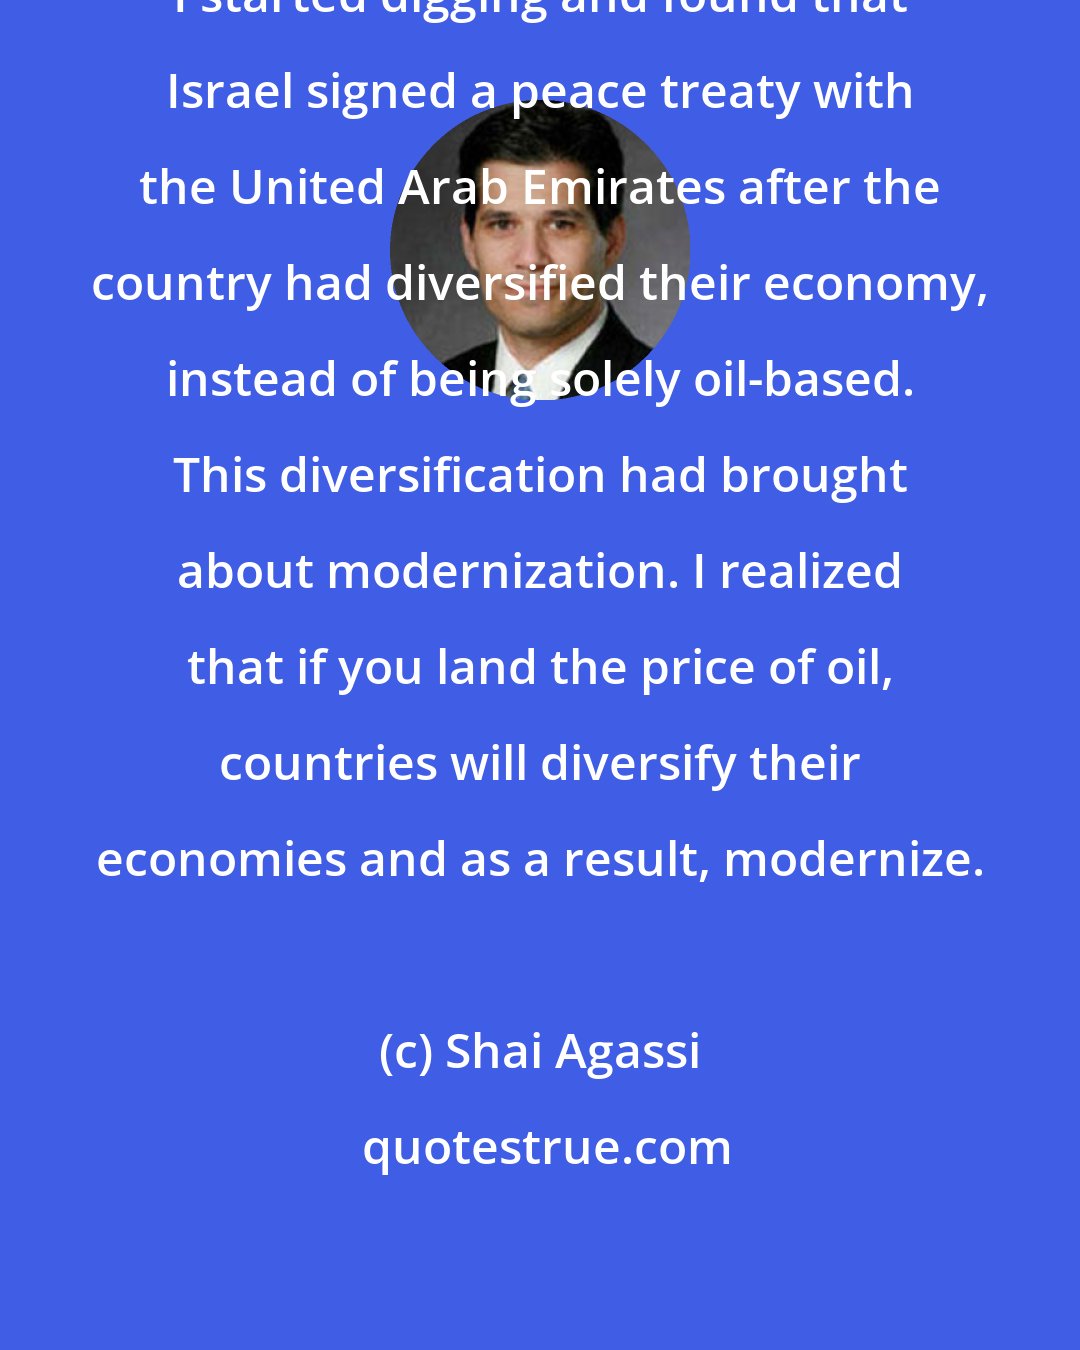 Shai Agassi: I started digging and found that Israel signed a peace treaty with the United Arab Emirates after the country had diversified their economy, instead of being solely oil-based. This diversification had brought about modernization. I realized that if you land the price of oil, countries will diversify their economies and as a result, modernize.